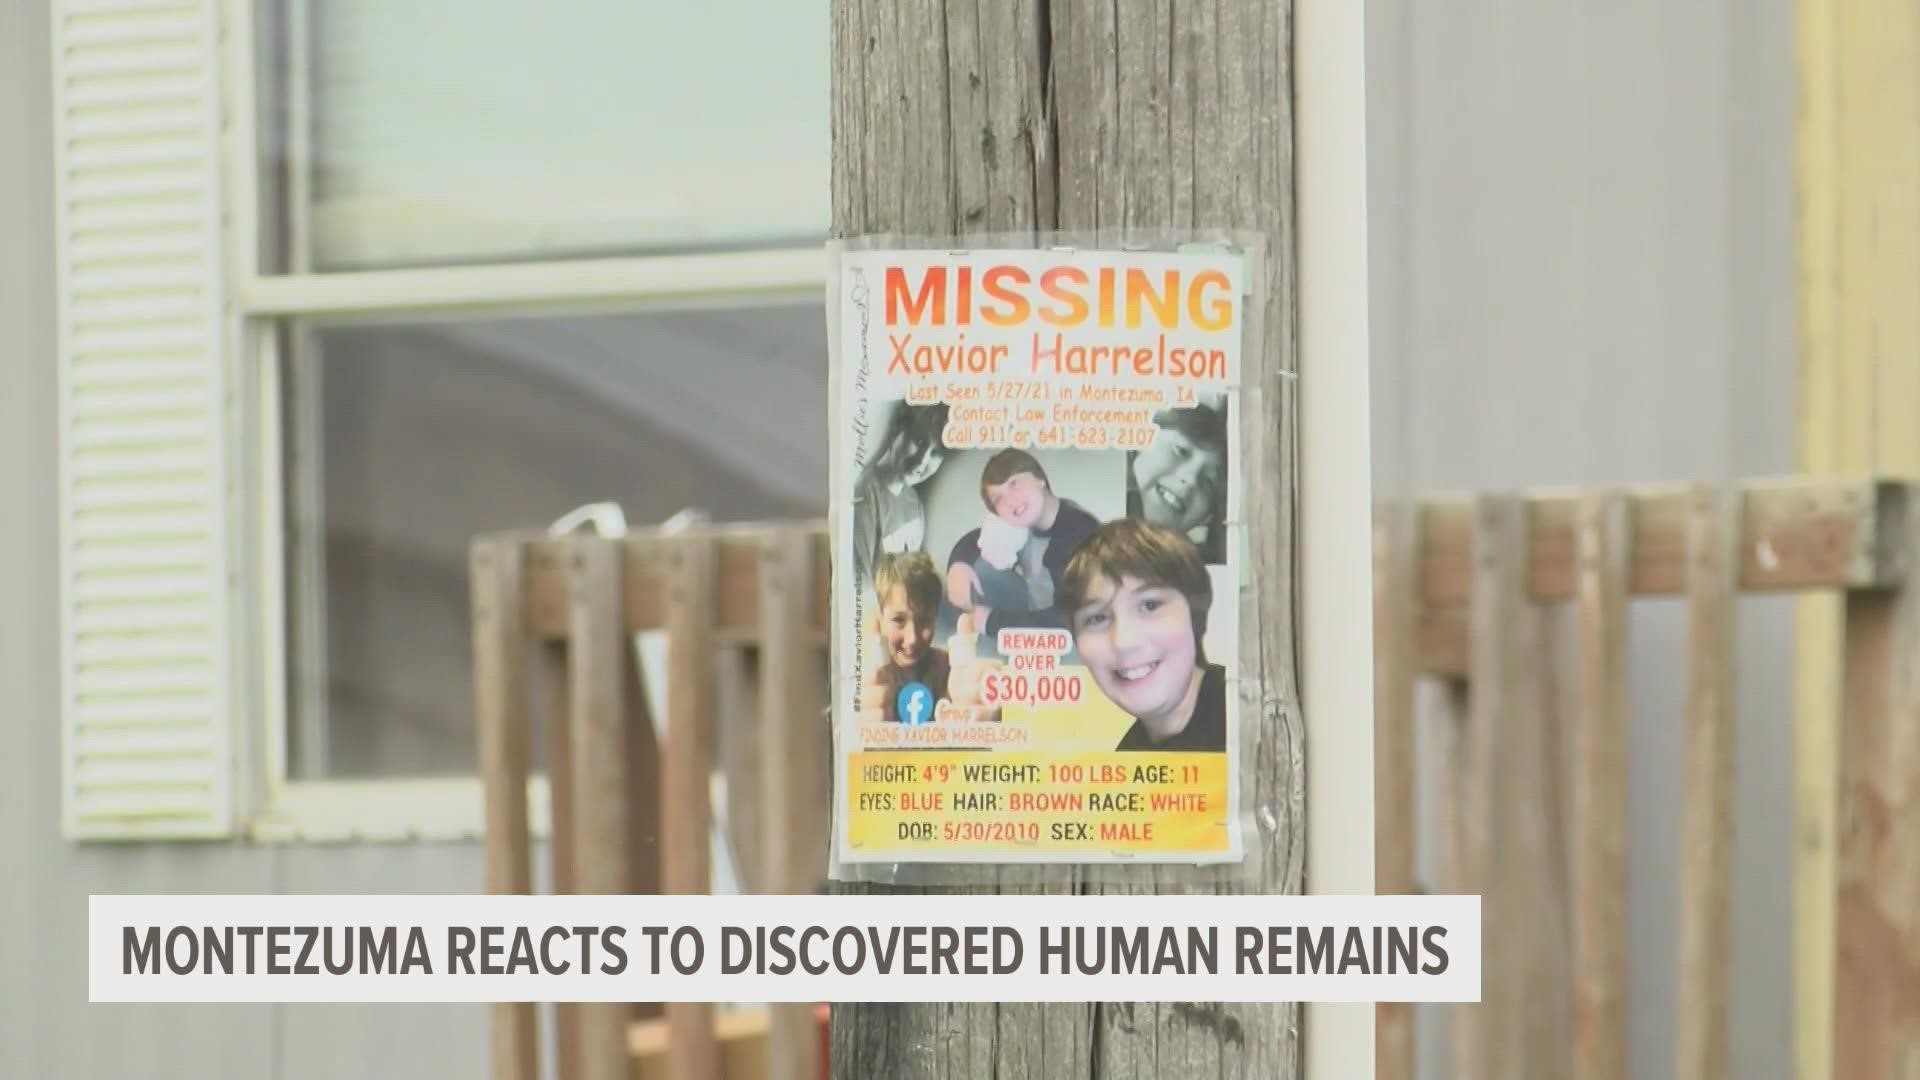 The missing person signs showing the boy's smiling face will remain on display until the community receives confirmation on whether or not the remains are his.